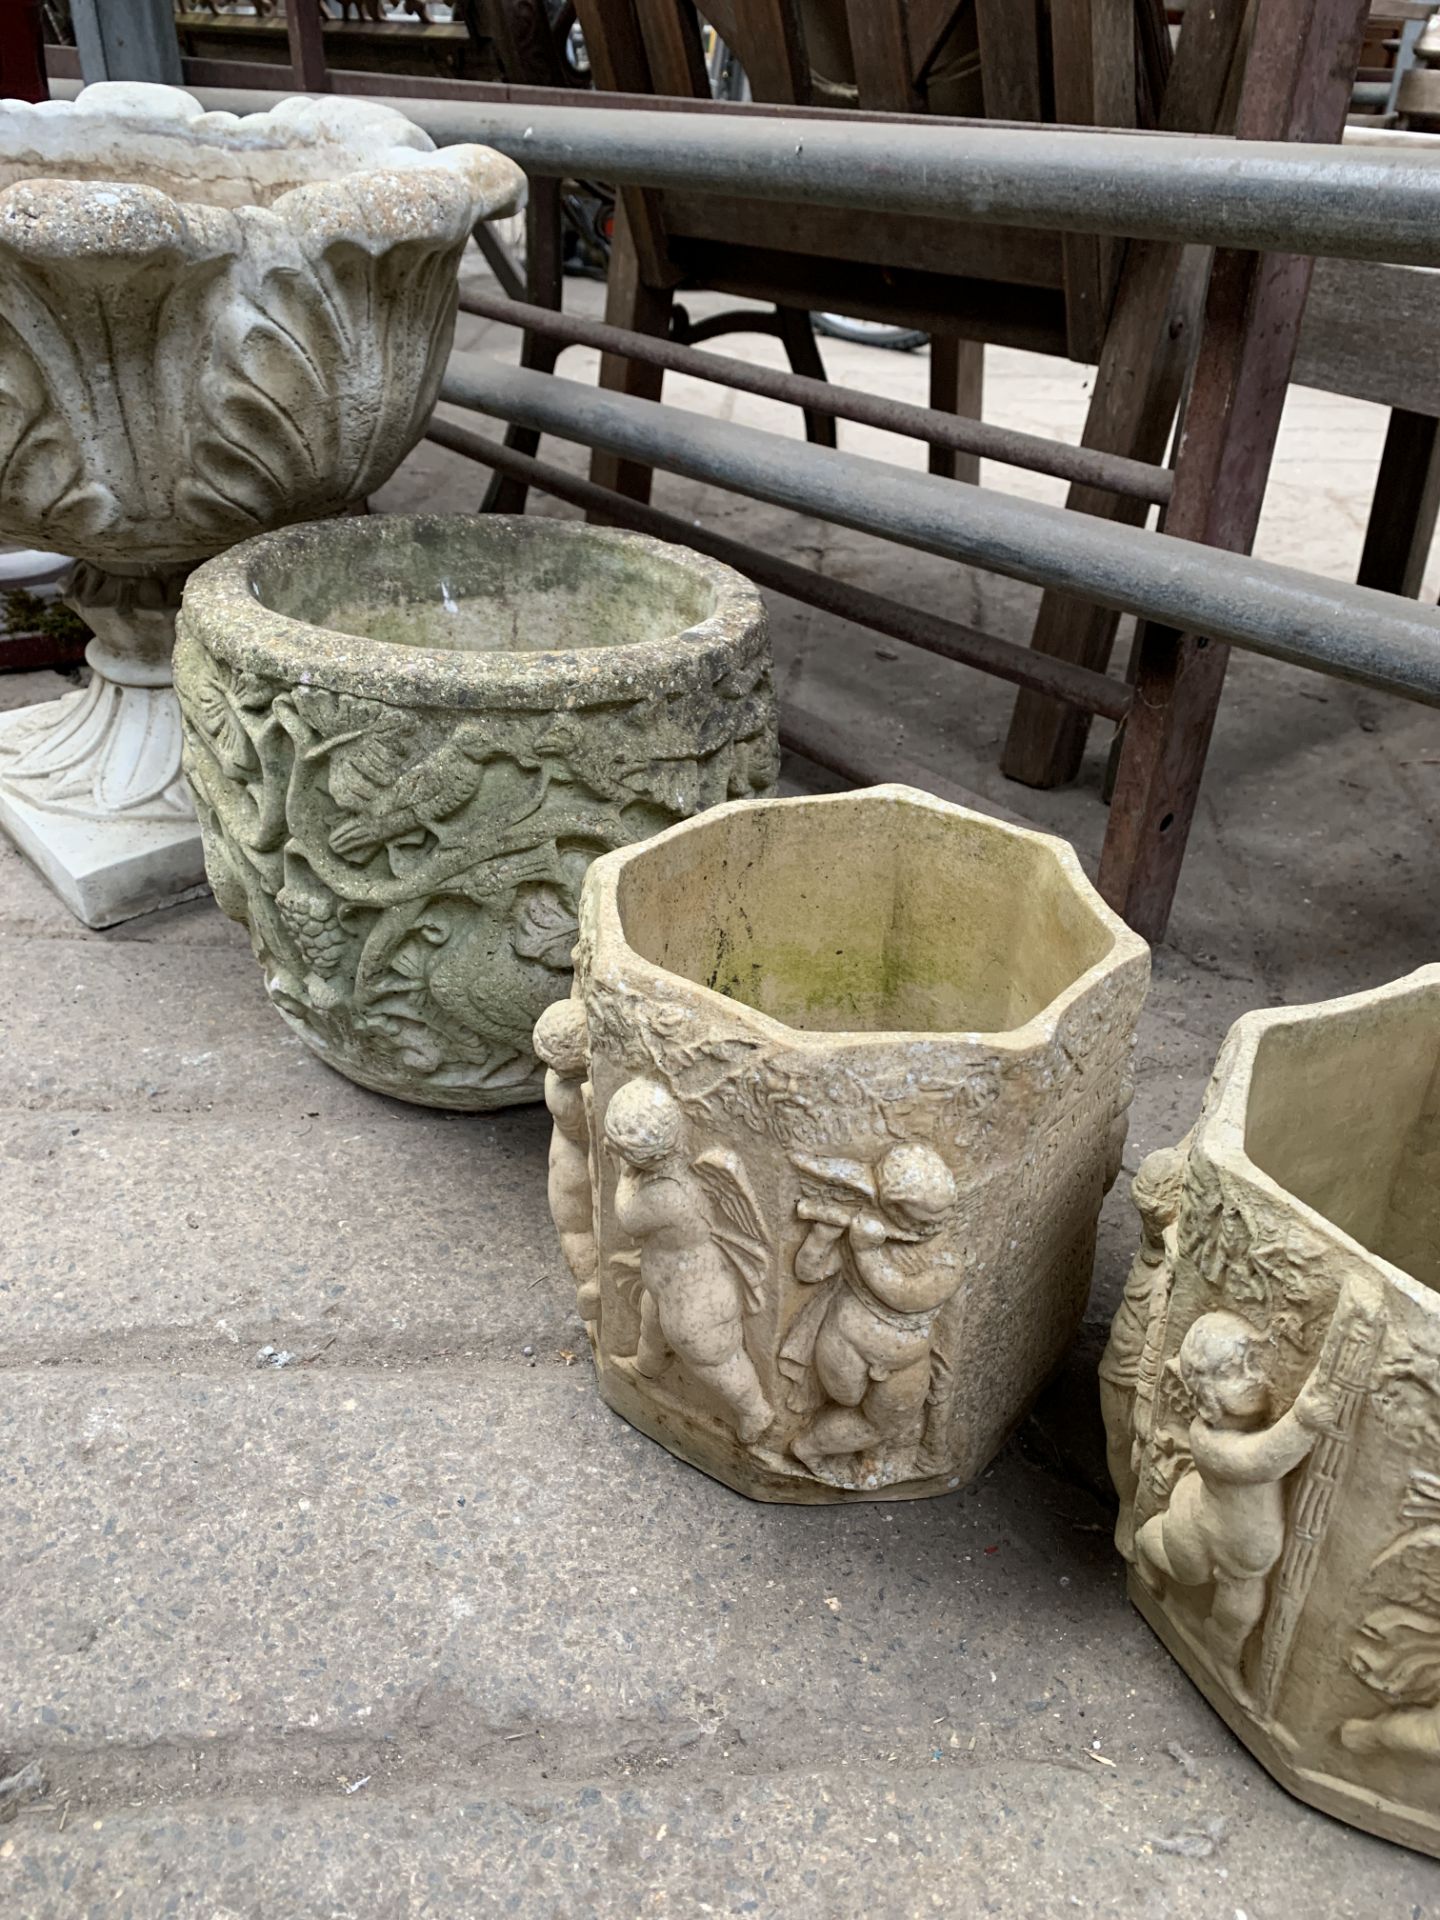 A pair of planters, another planter, and a jardiniere